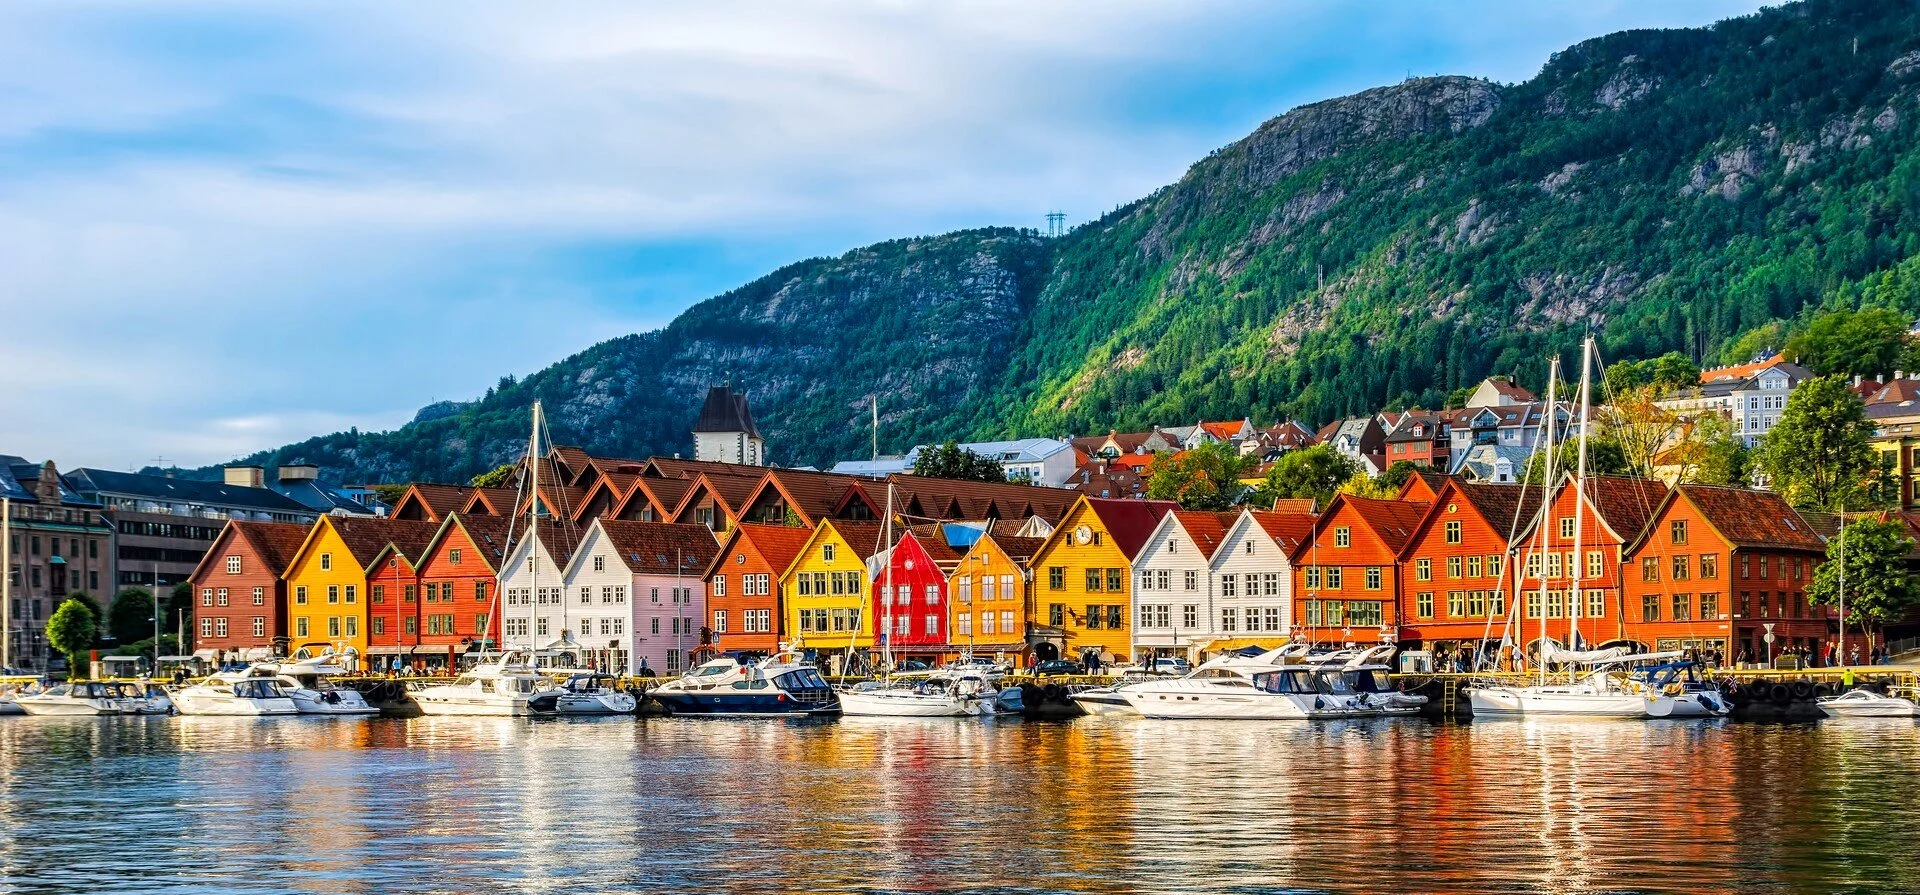 What to See in Bergen Norway, Bergen Highlights